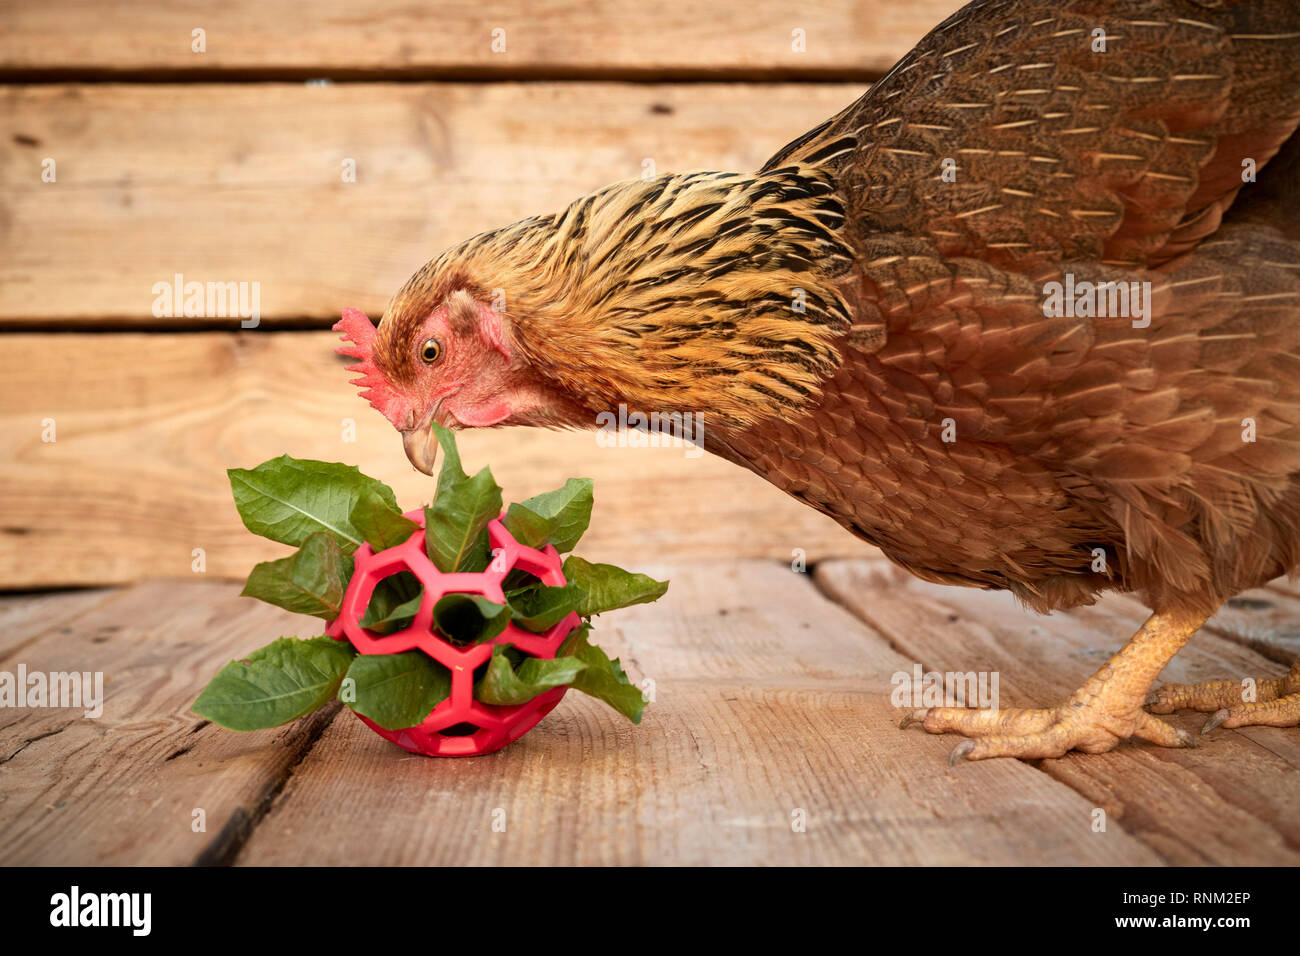 Welsummer Chicken. Hen pecking dandelion leaves from a grid ball. Germany Stock Photo